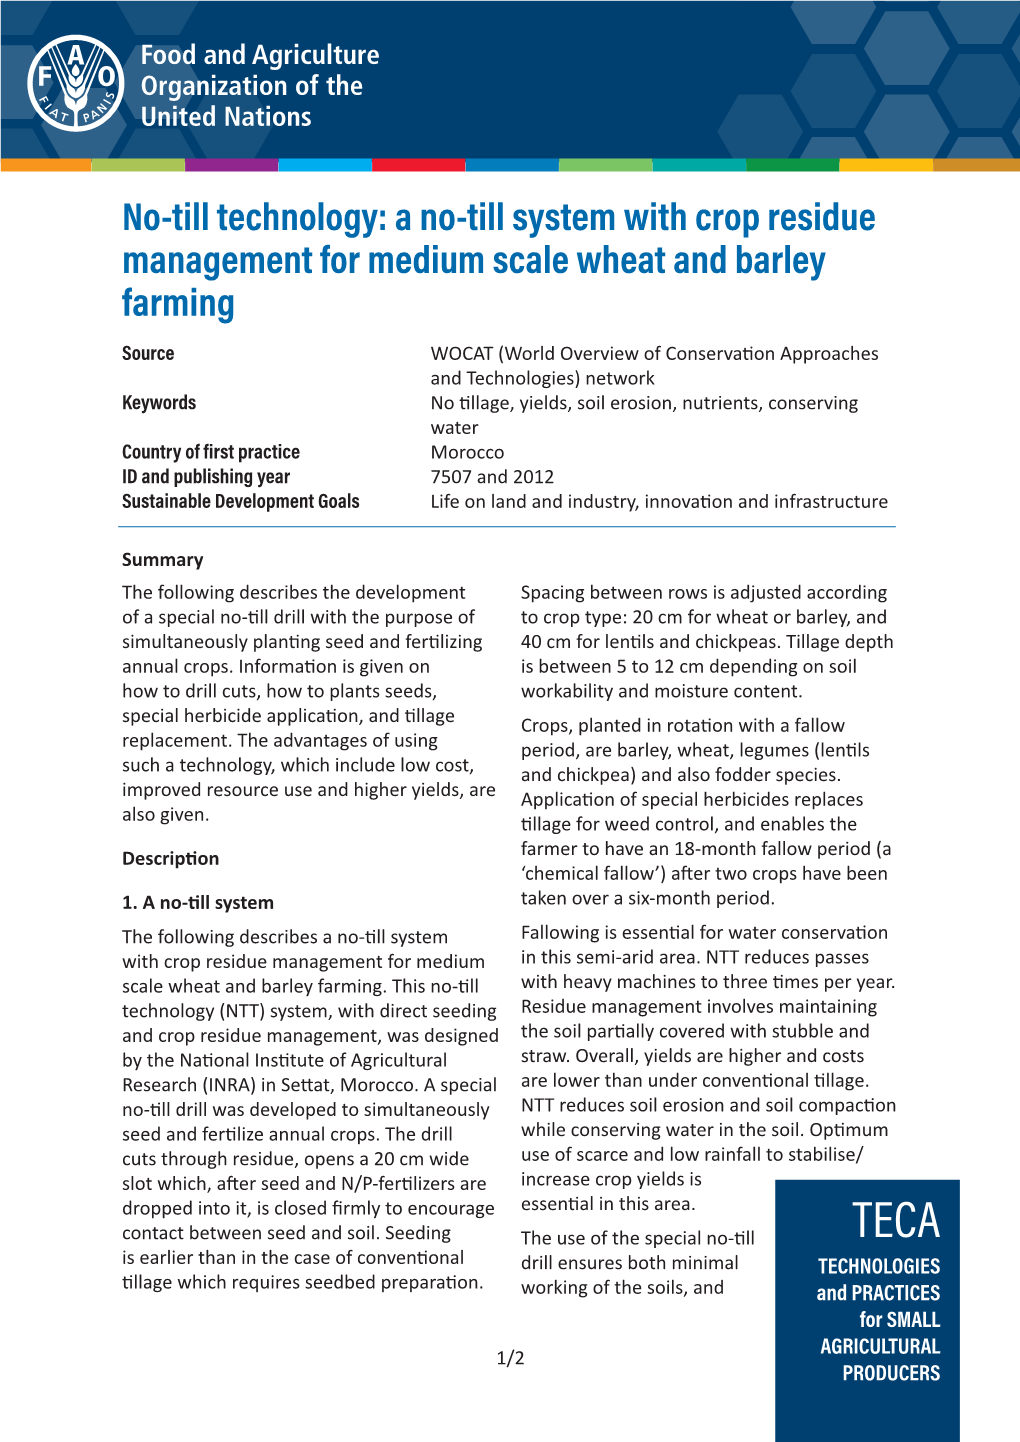 A No-Till System with Crop Residue Management for Medium Scale